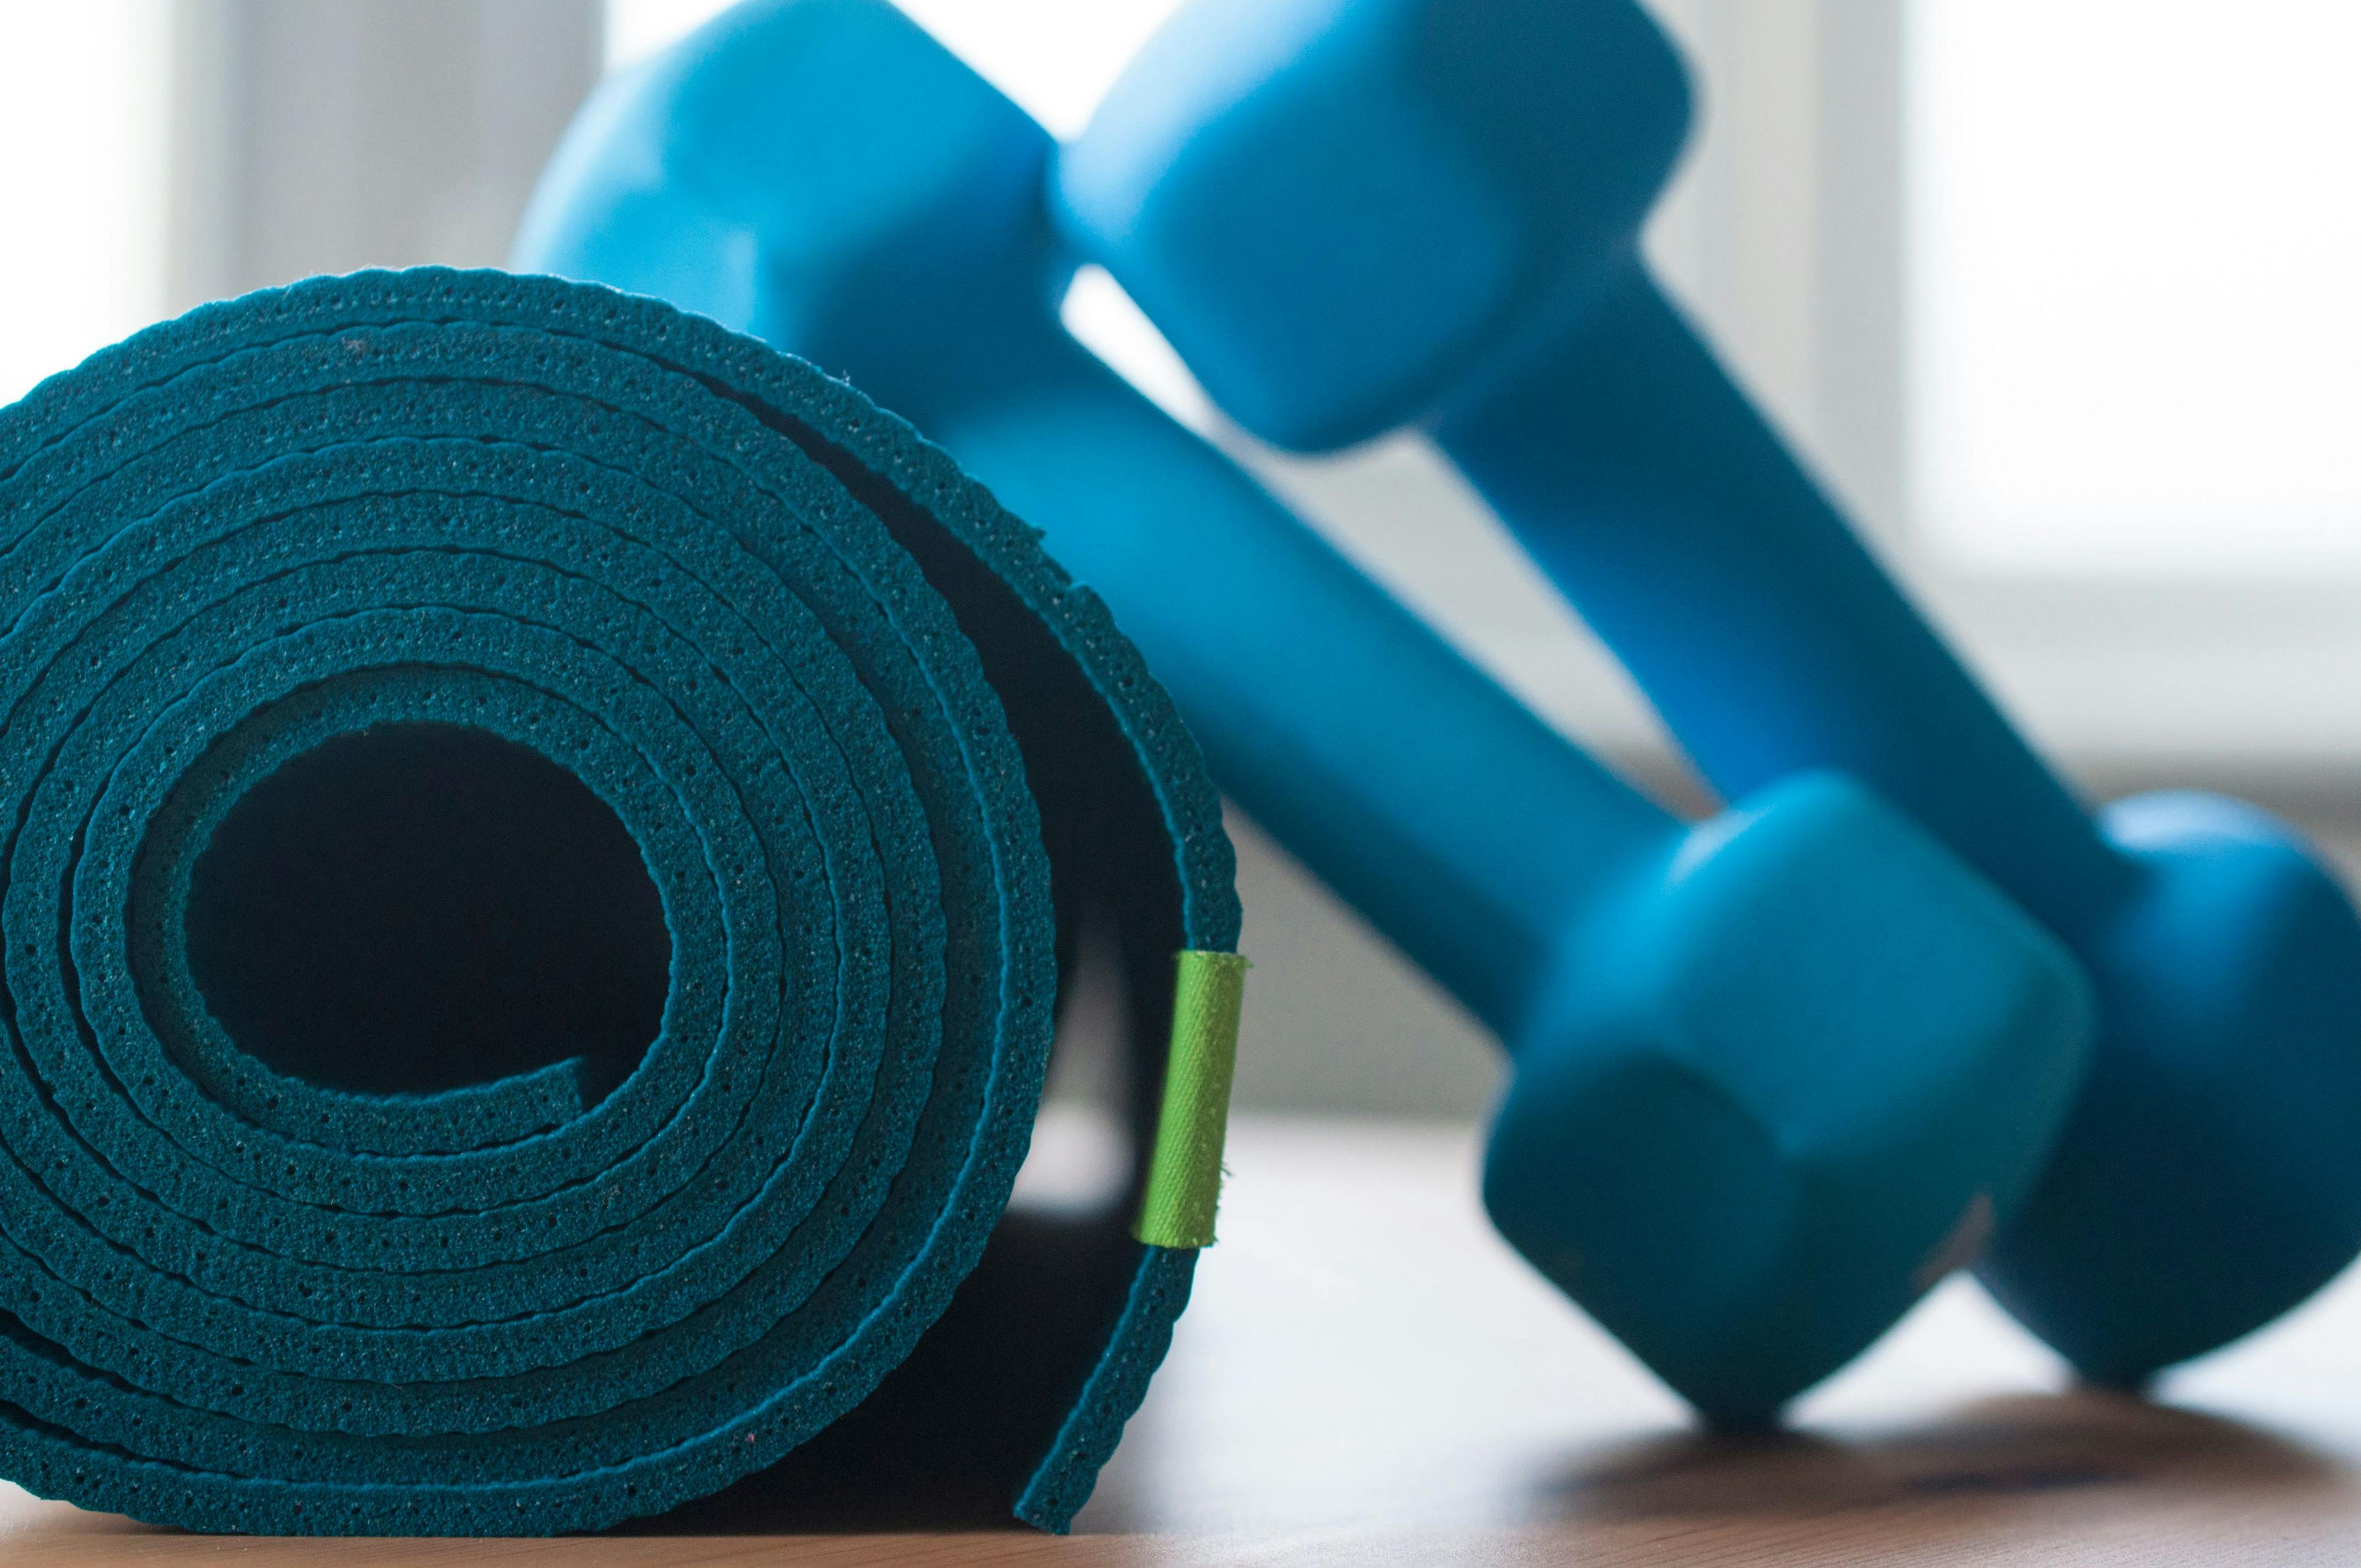 Image of a yoga mat and two dumbbells.